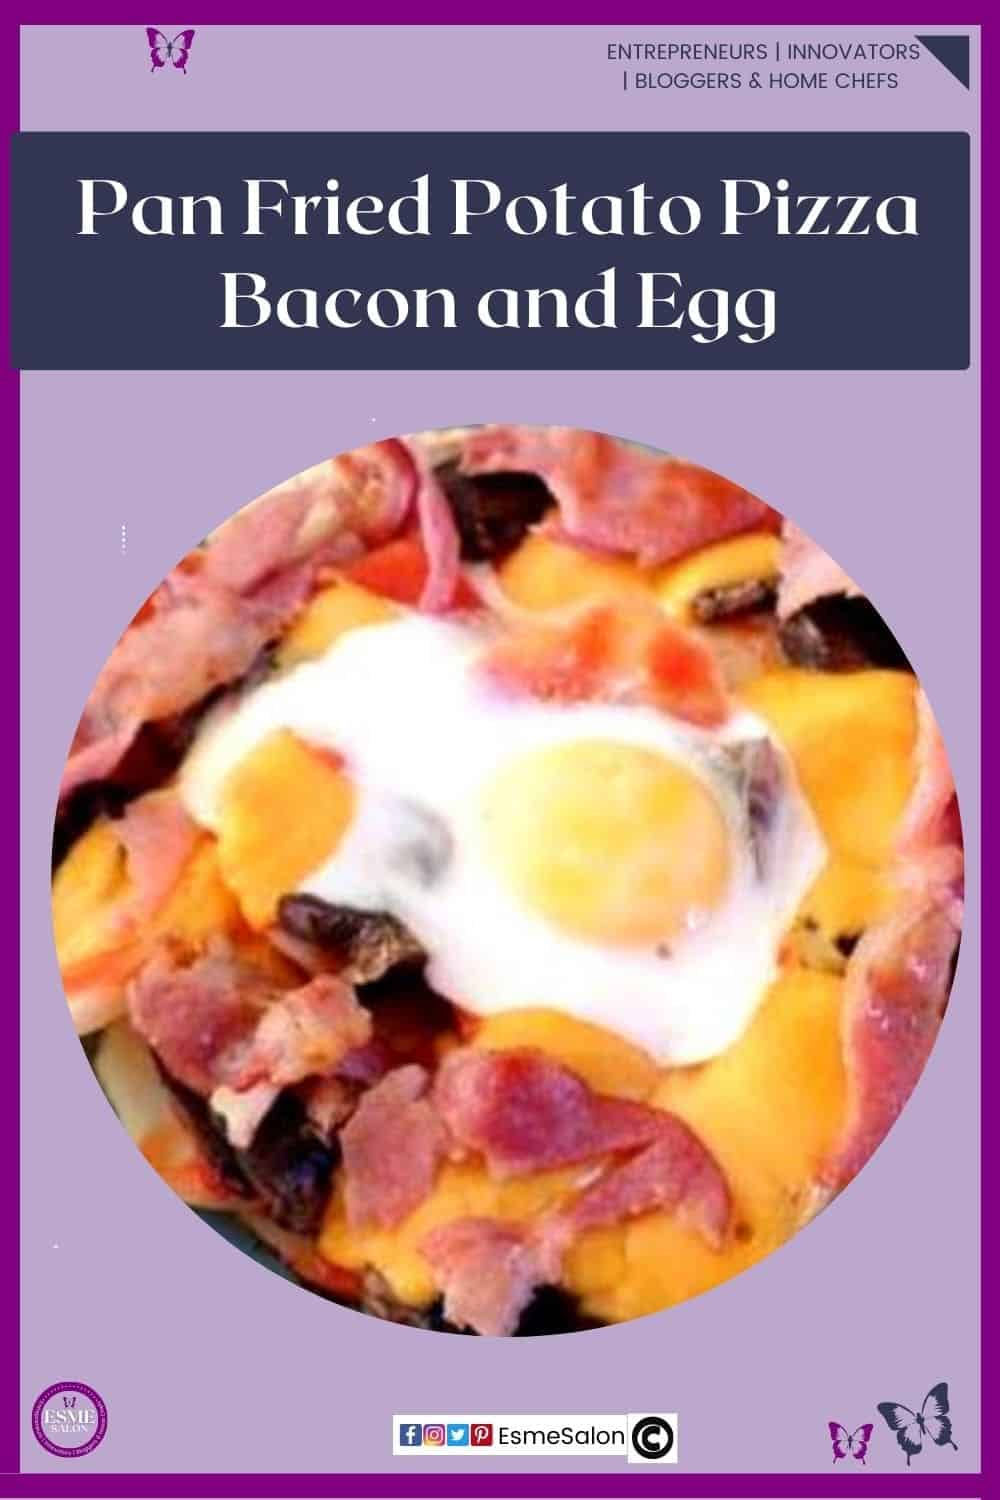 an image of a blue plate with a layer of potato as a base, and topped with bacon and egg